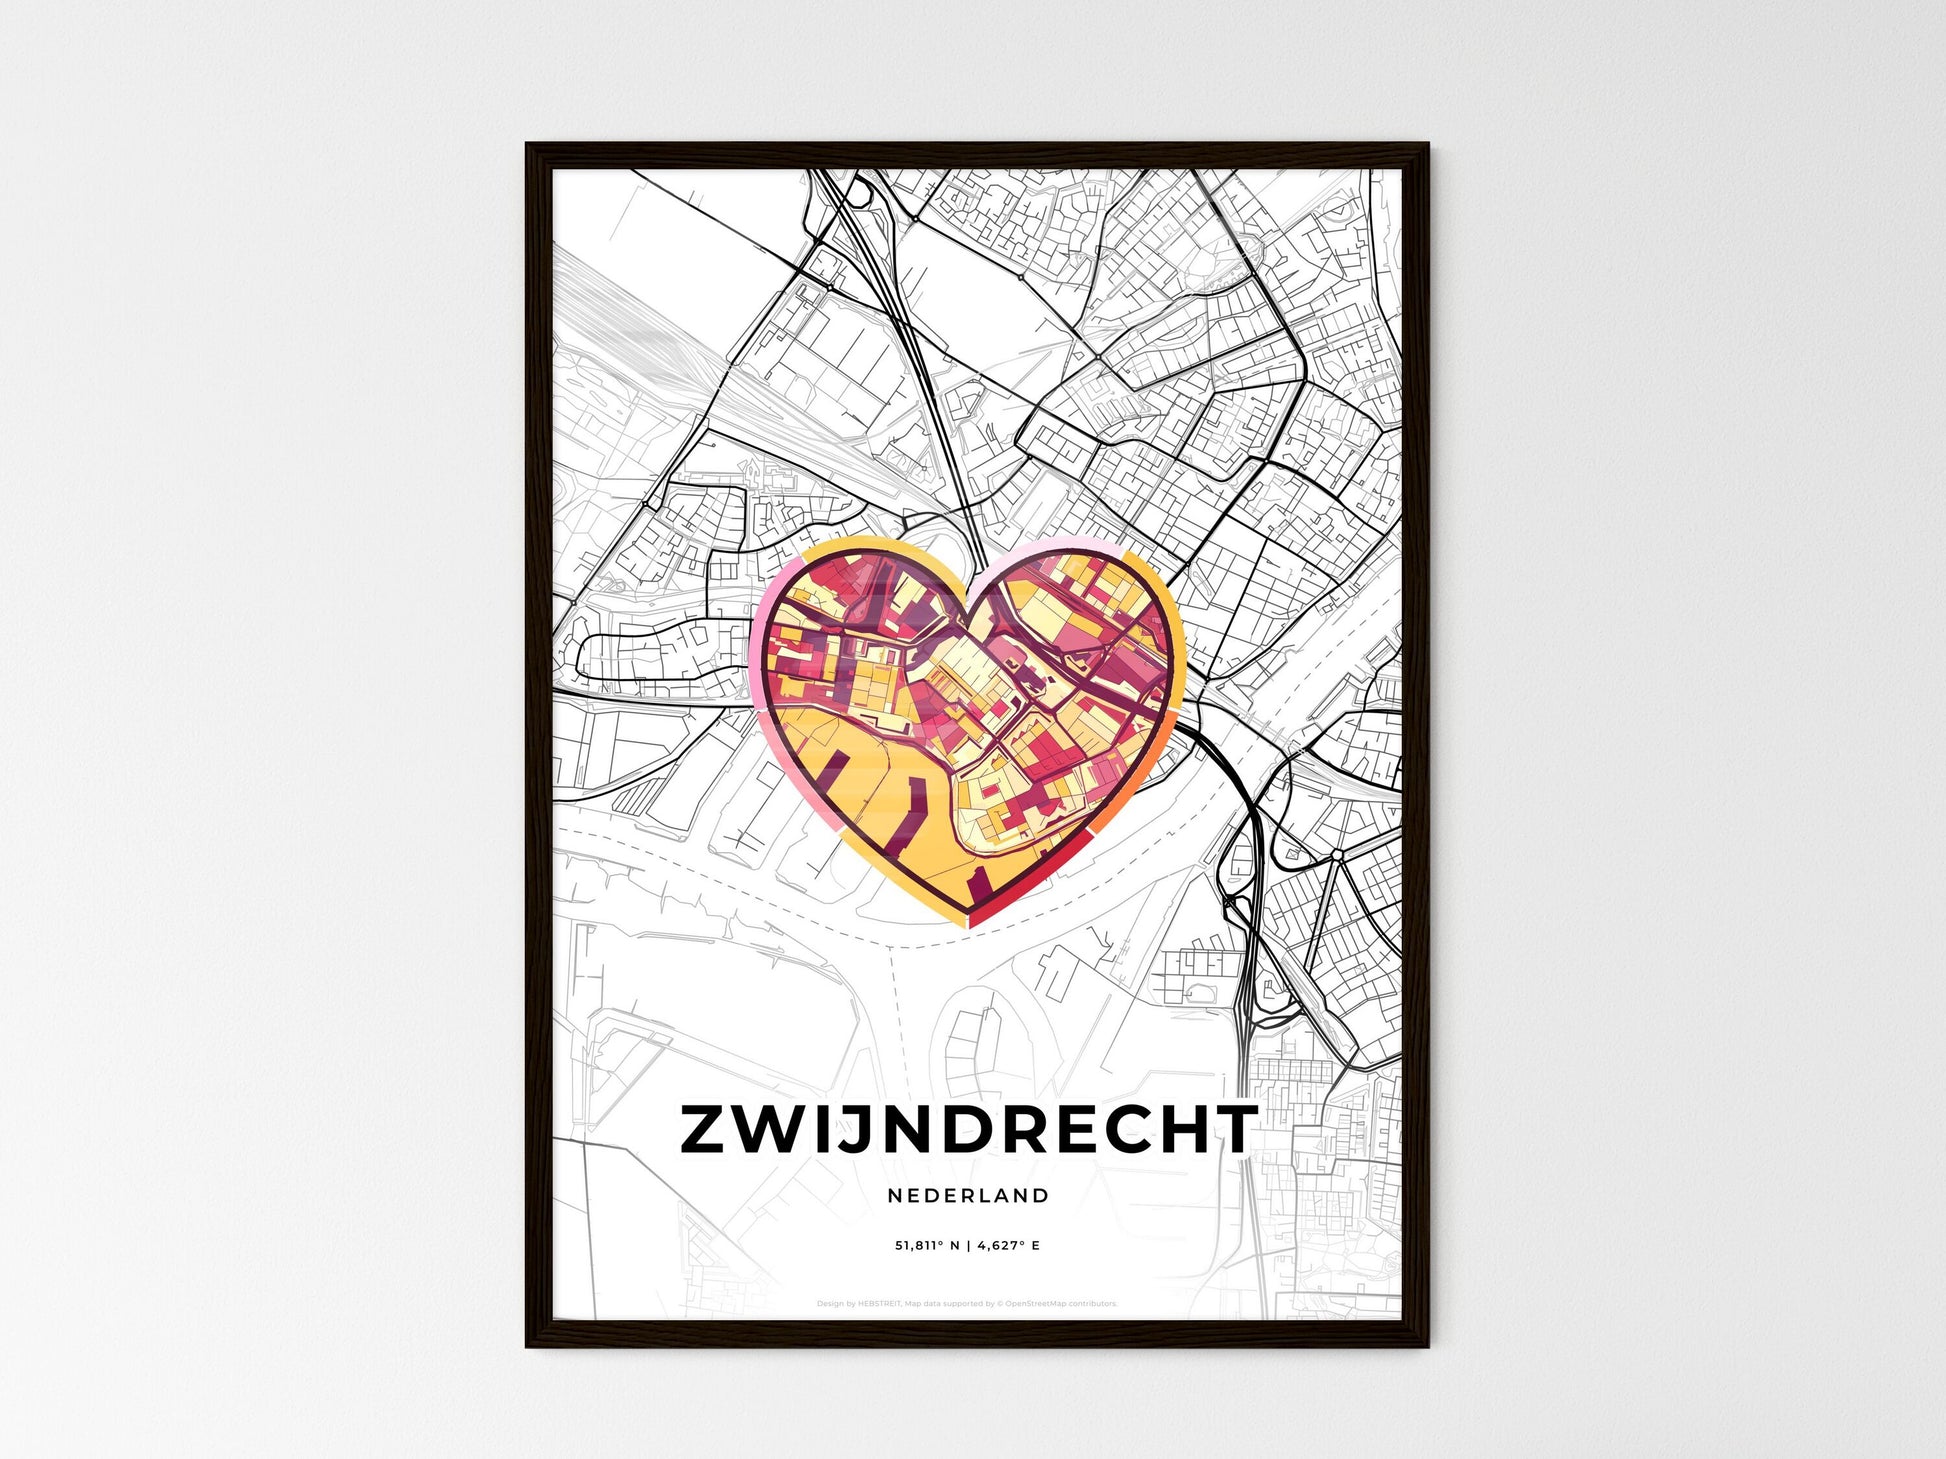 ZWIJNDRECHT NETHERLANDS minimal art map with a colorful icon. Where it all began, Couple map gift. Style 2